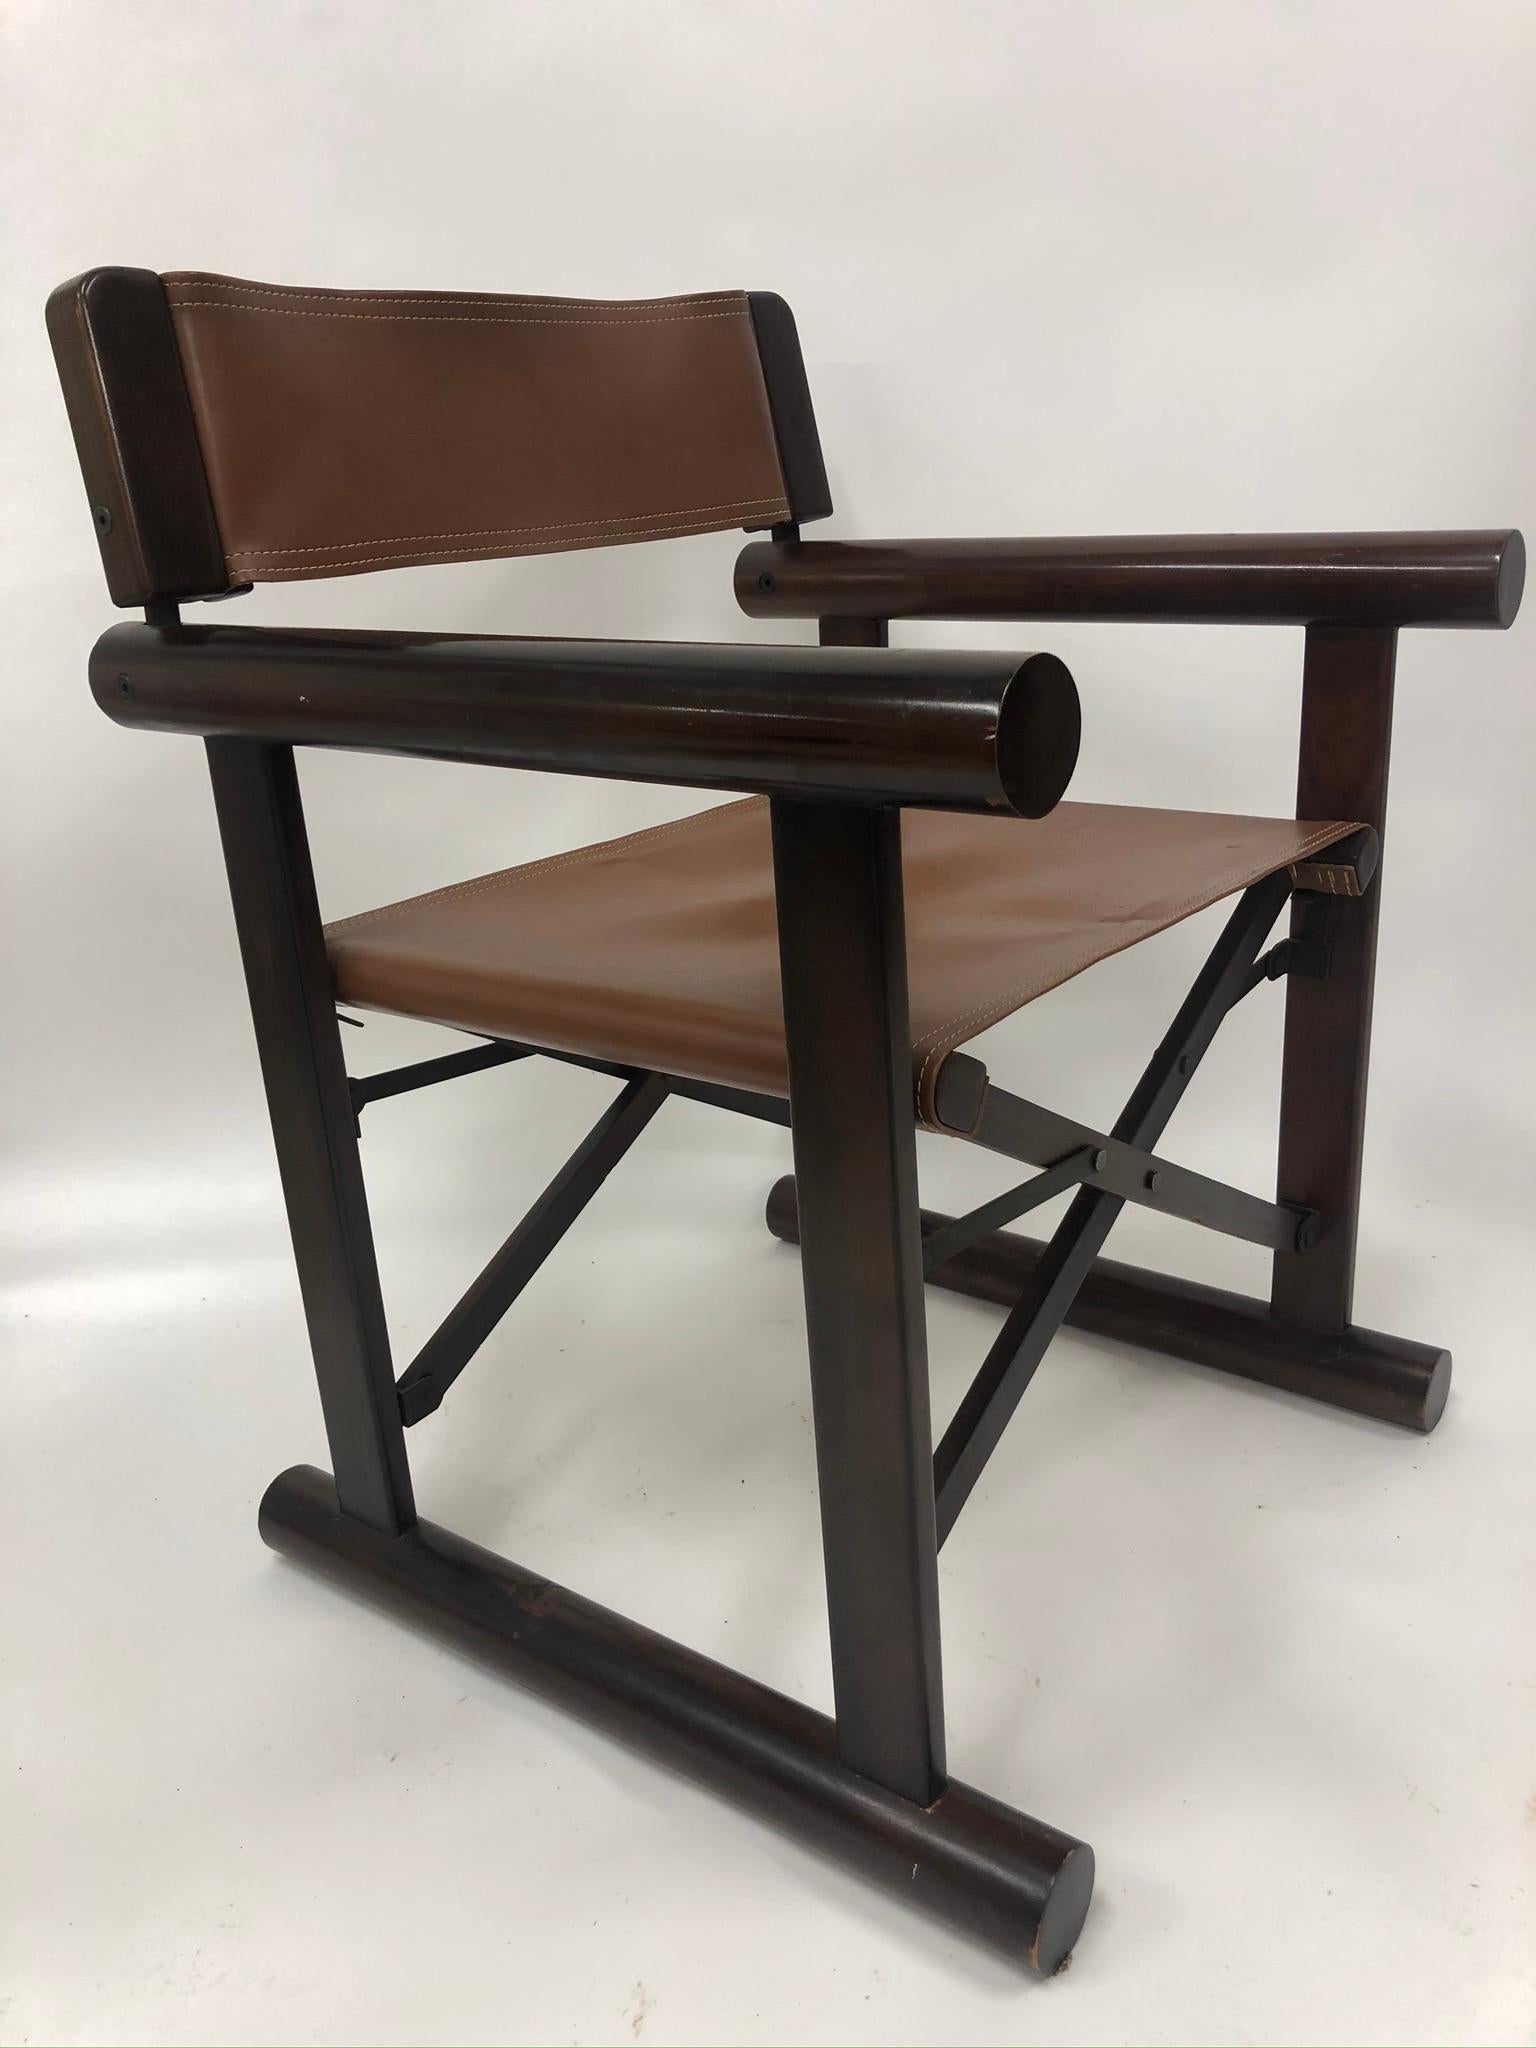 Campaign chair with faux leather seat back. Dimensions: W 24